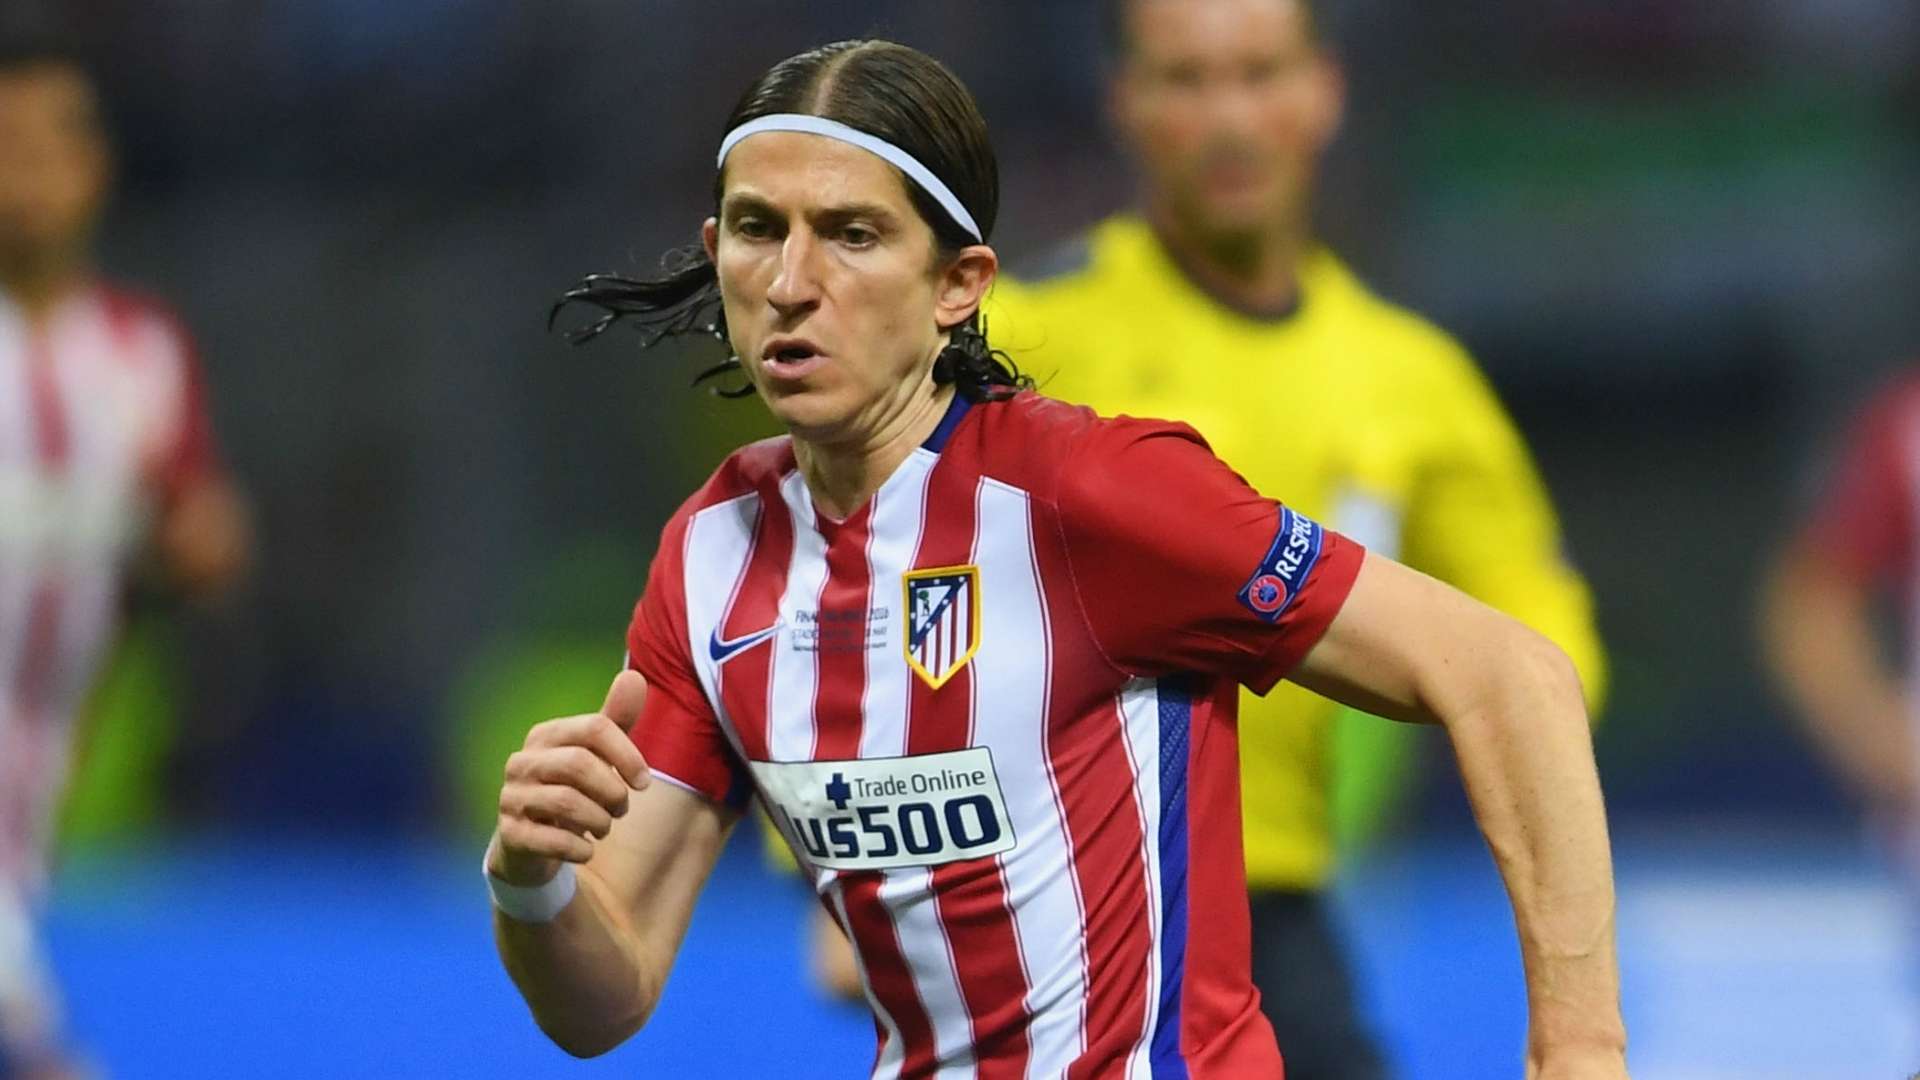 UCL FINAL REAL MADRID ATLETICO FILIPE LUIS 28052016